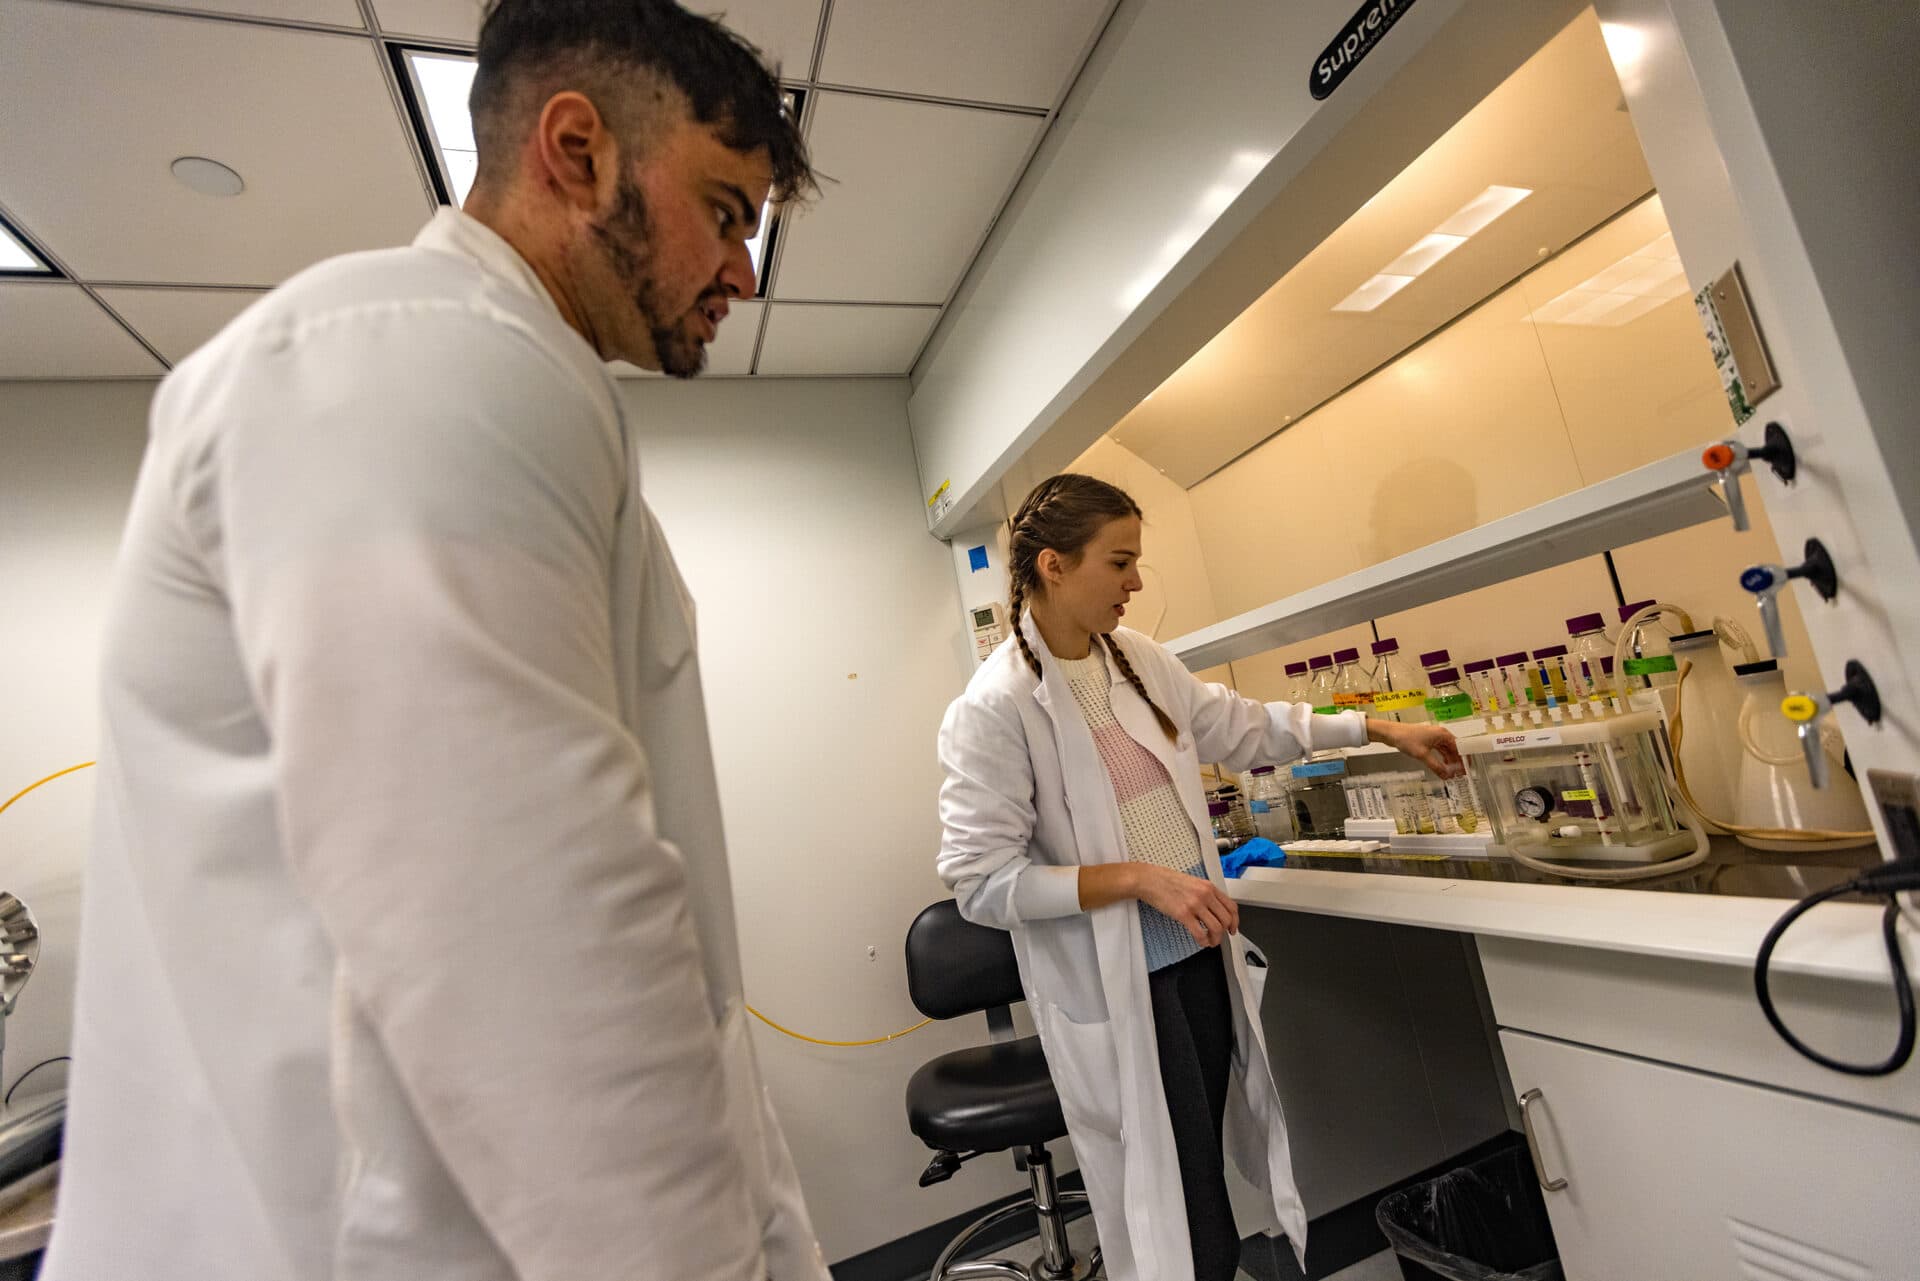 At a Harvard University lab, doctoral student Heidi Pickard, right, and research fellow Faiz Haque review the procedures to evaporate and separate PFAS chemical compounds from soil samples. (Jesse Costa/WBUR)